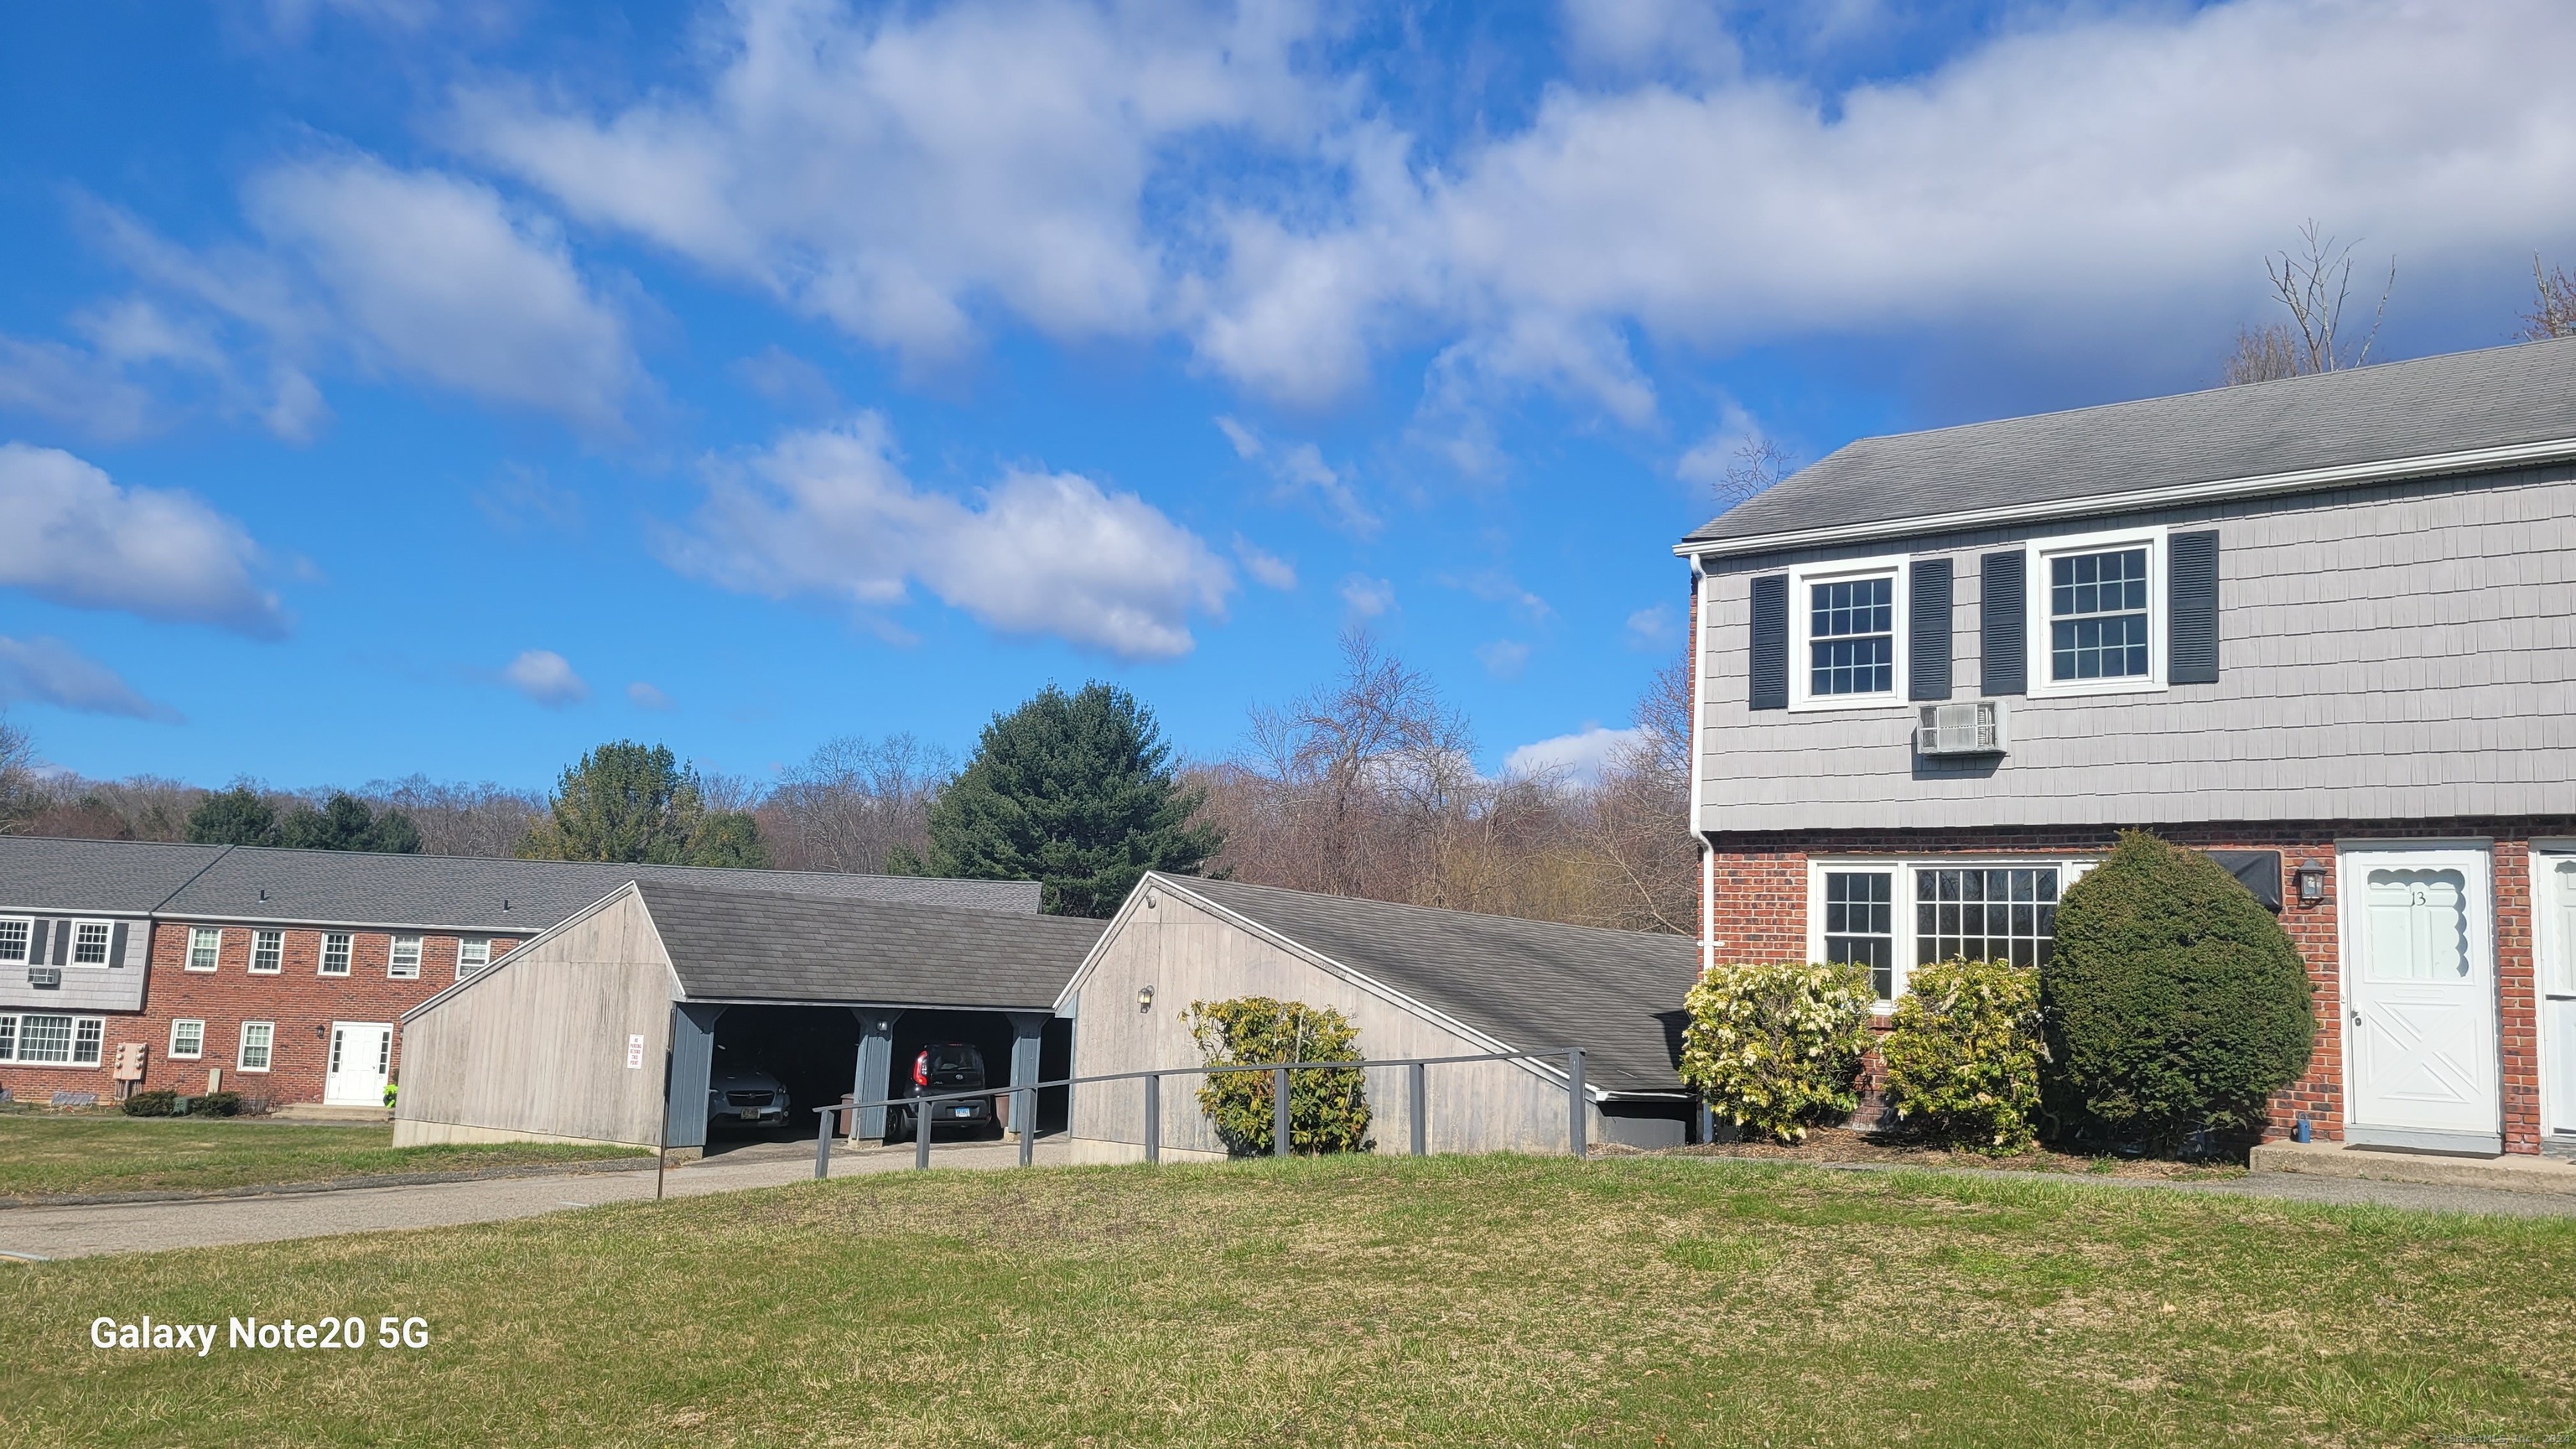 View New Milford, CT 06776 townhome